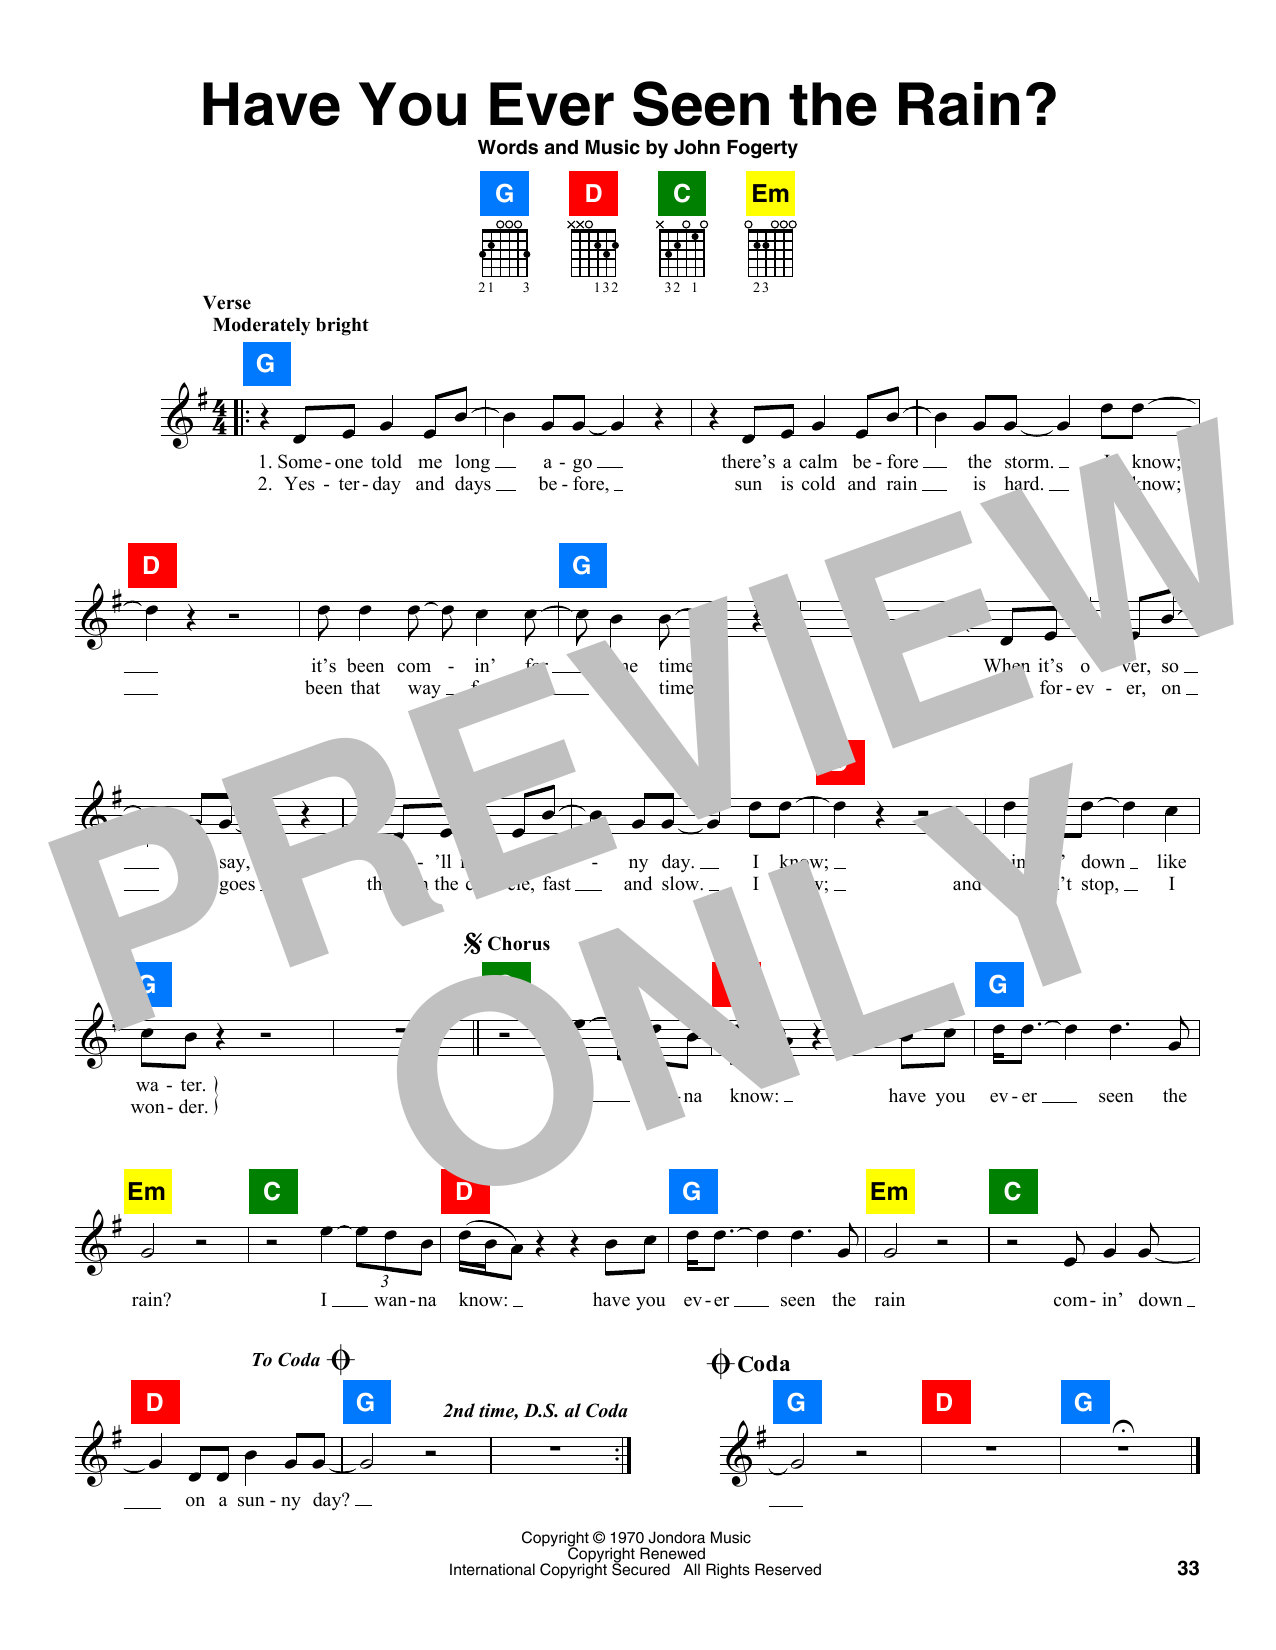 Download Creedence Clearwater Revival Have You Ever Seen The Rain? Sheet Music